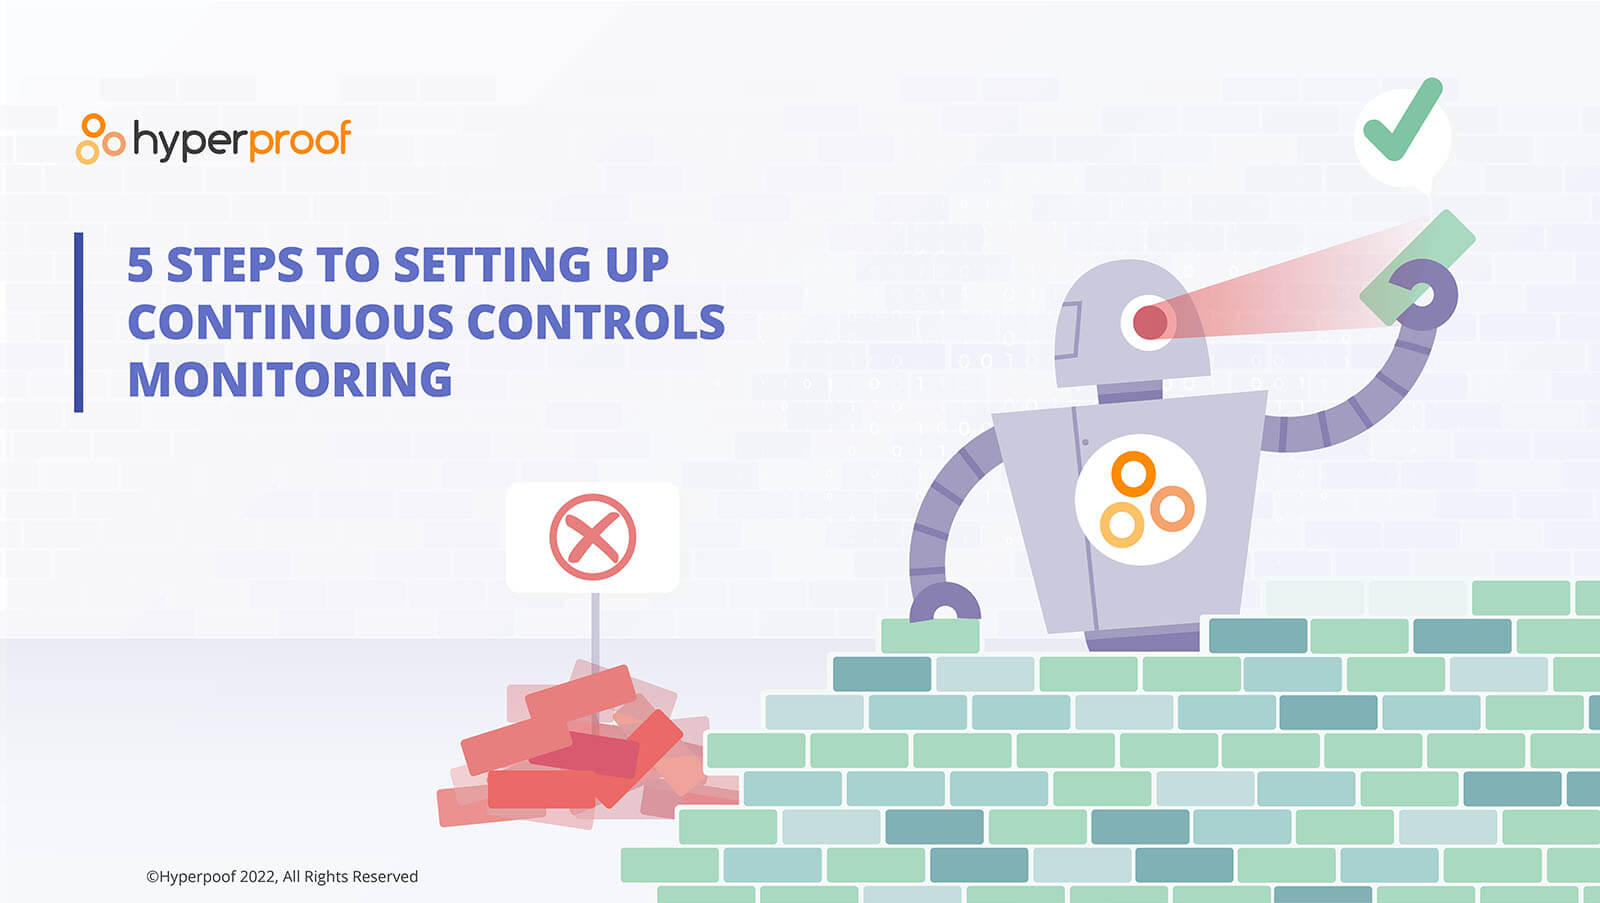 5 Steps to Setting Up Continuous Controls Monitoring